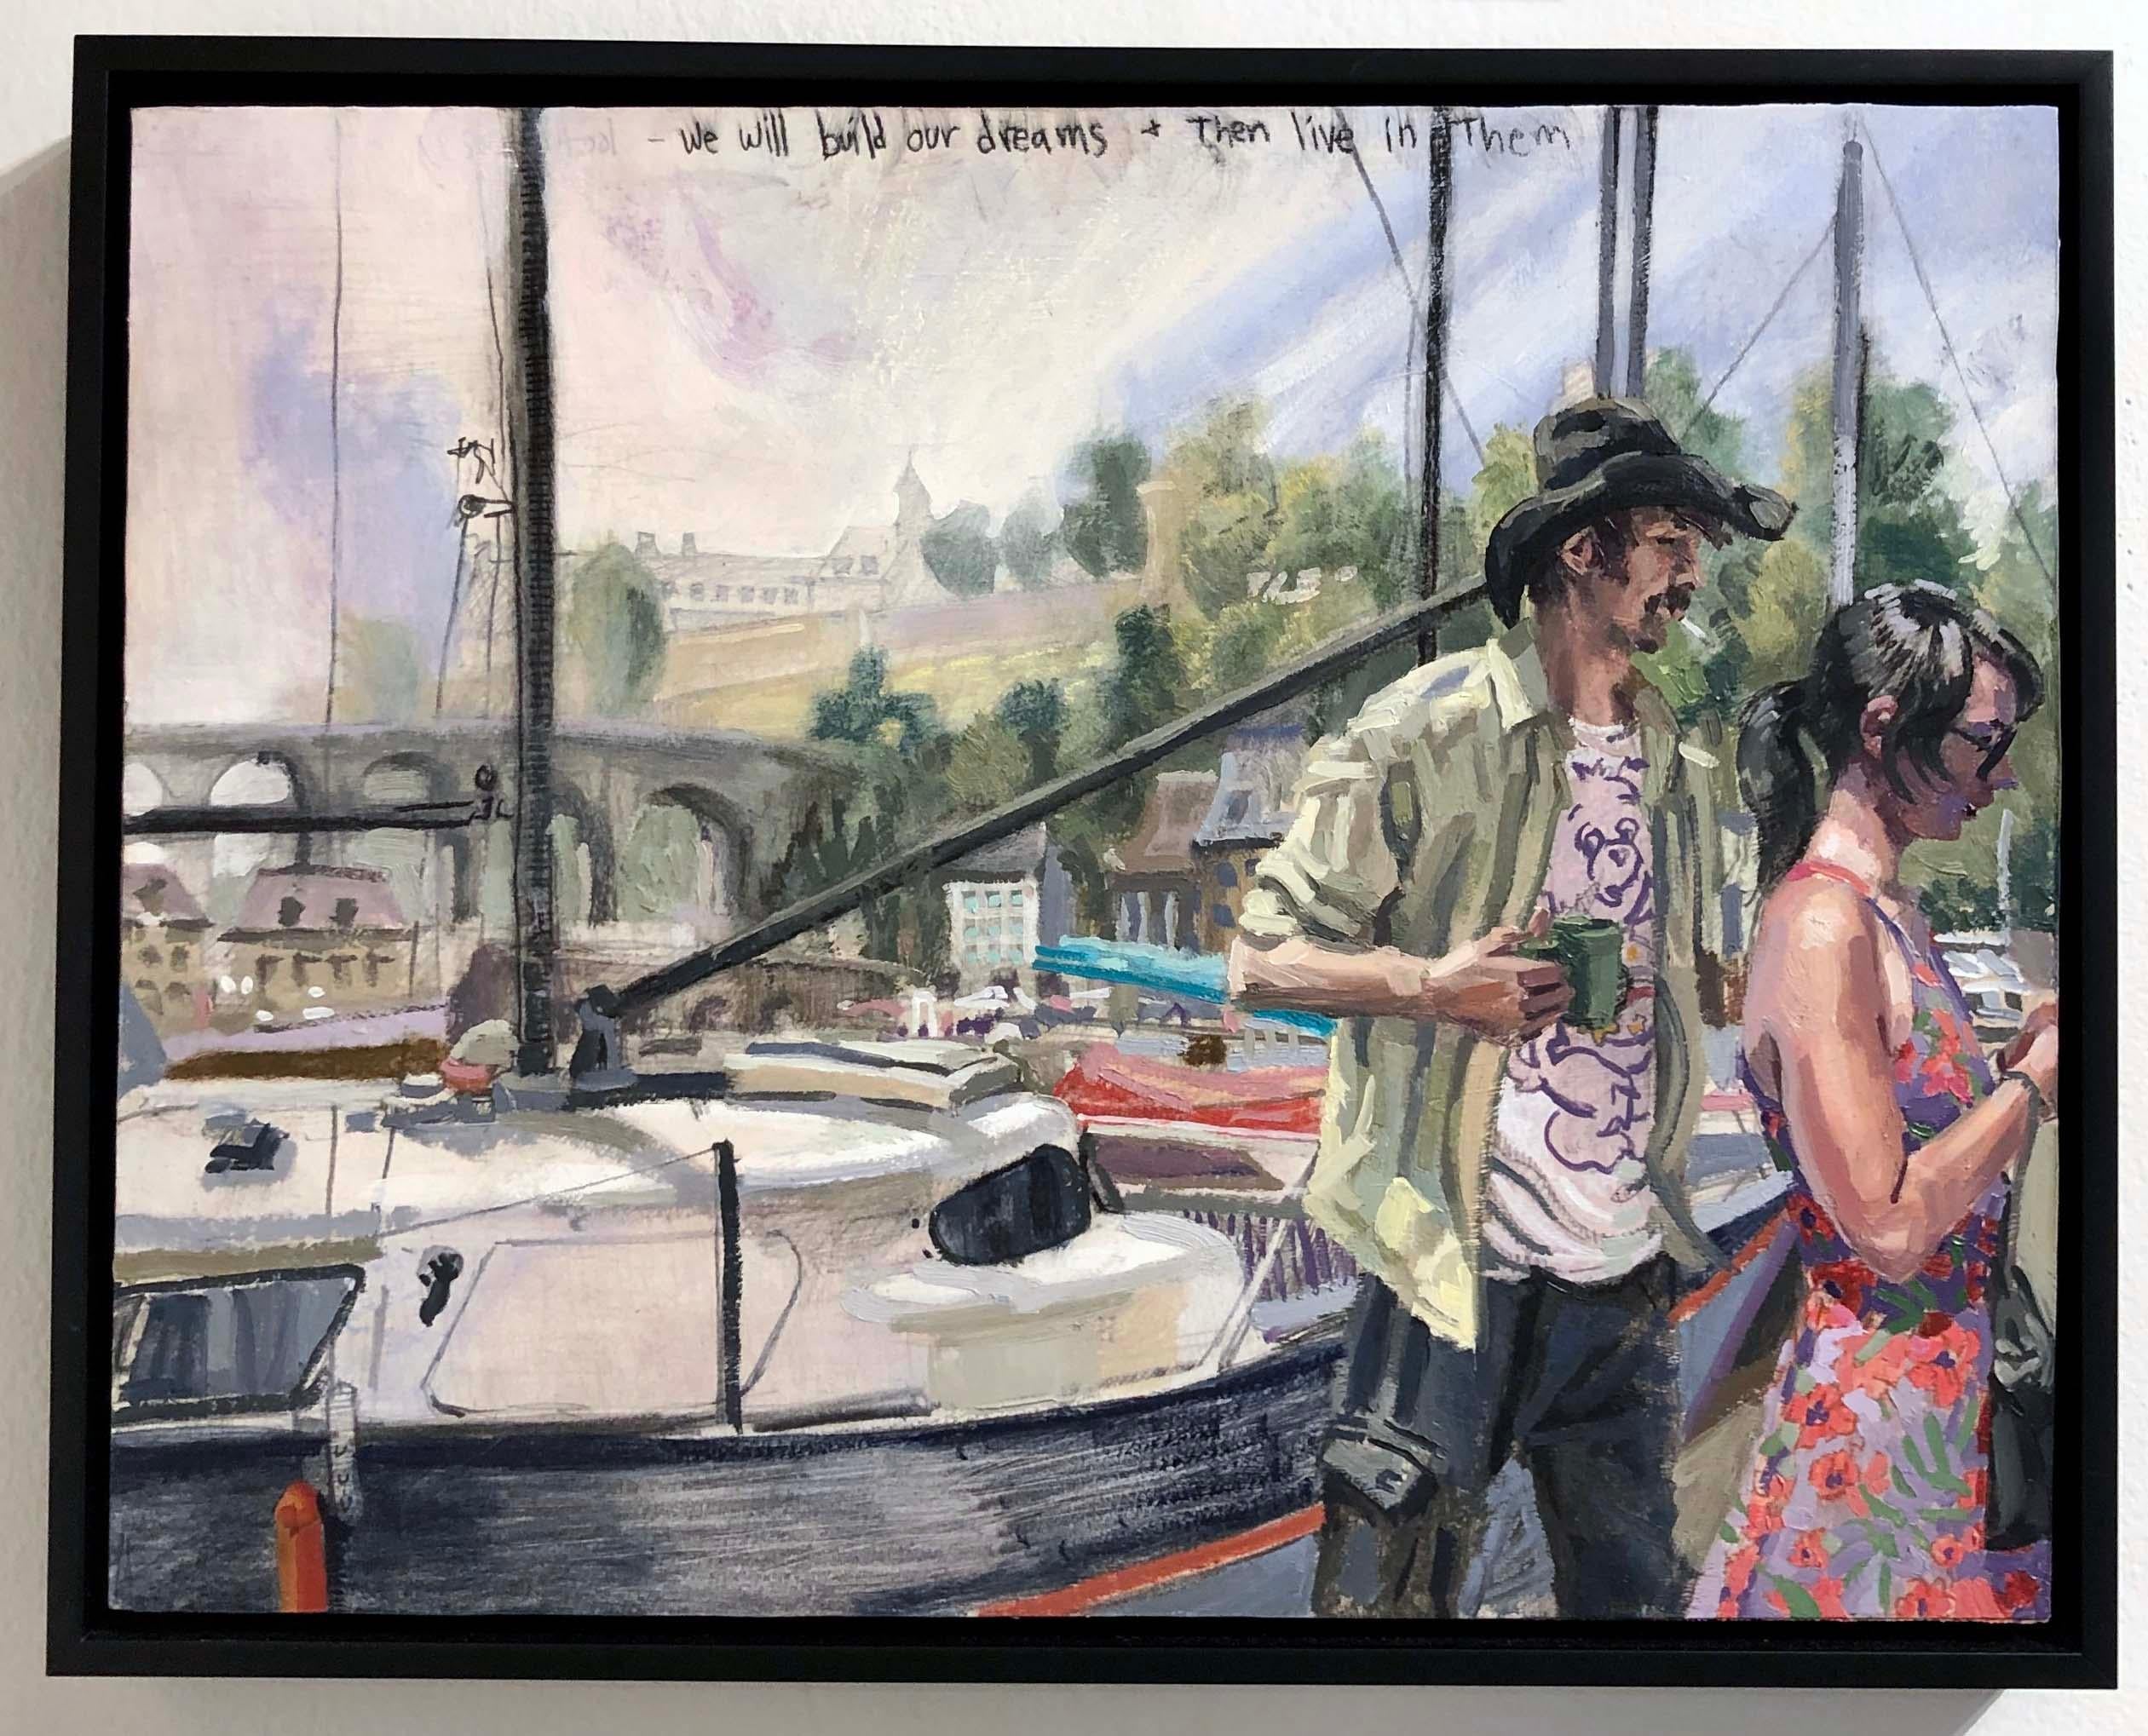 We Will Build Our Dreams and Then Live in Them #2, Two Figures & a Sailboat - Painting by Benjamin Duke